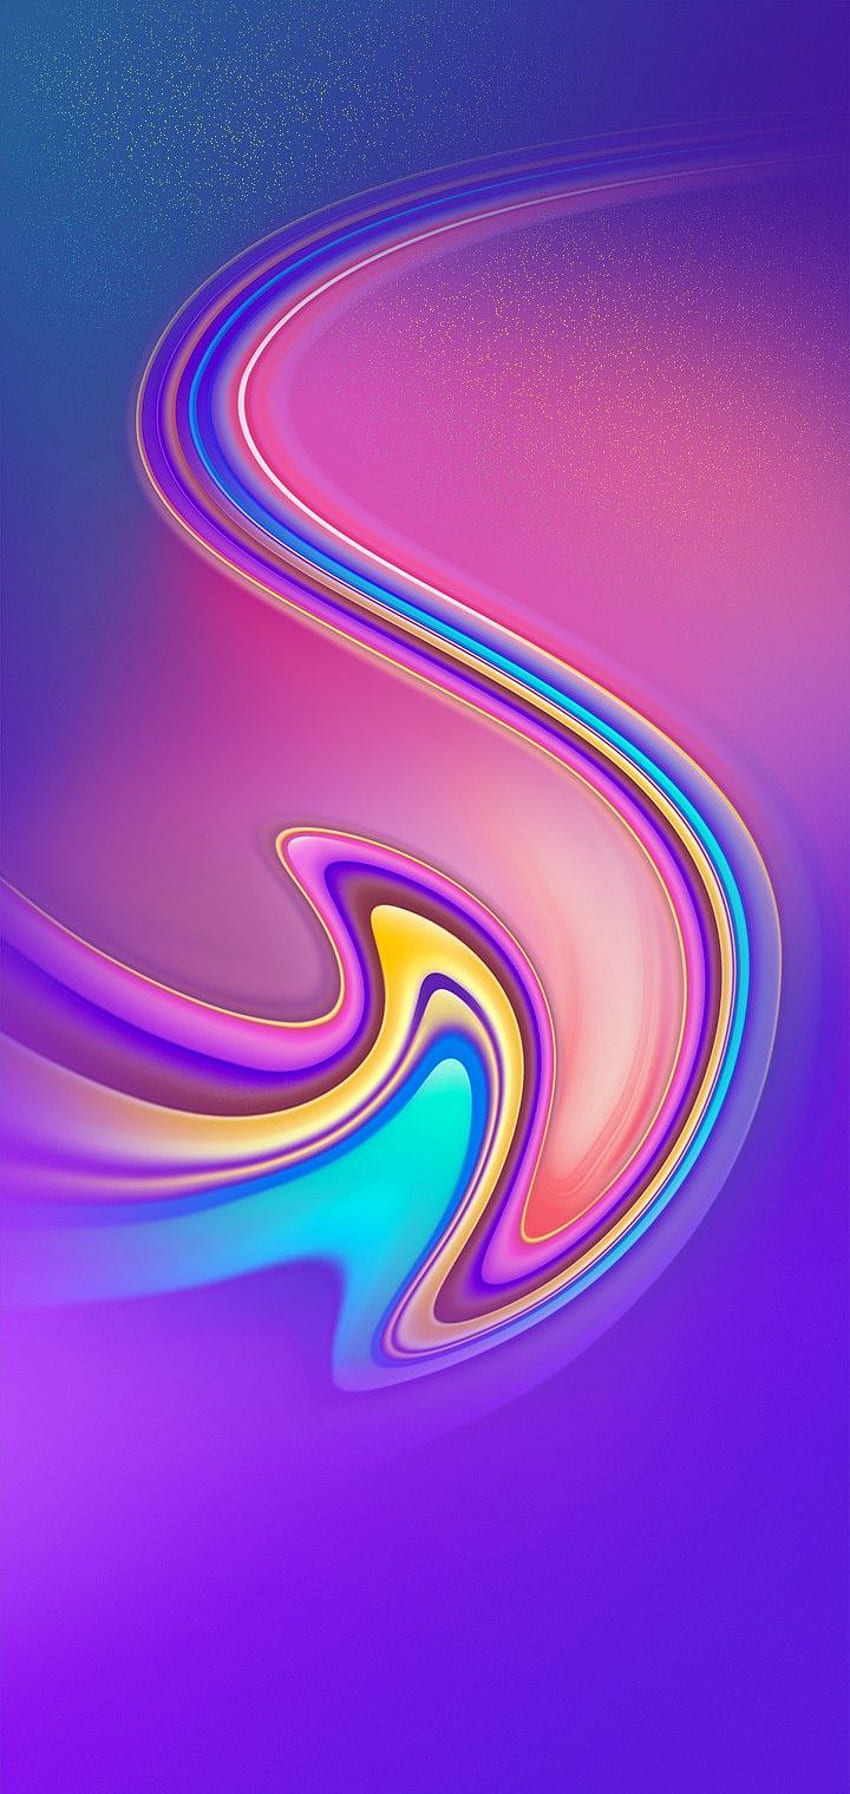 Sexy Art Wallpapers for Mobile Phones